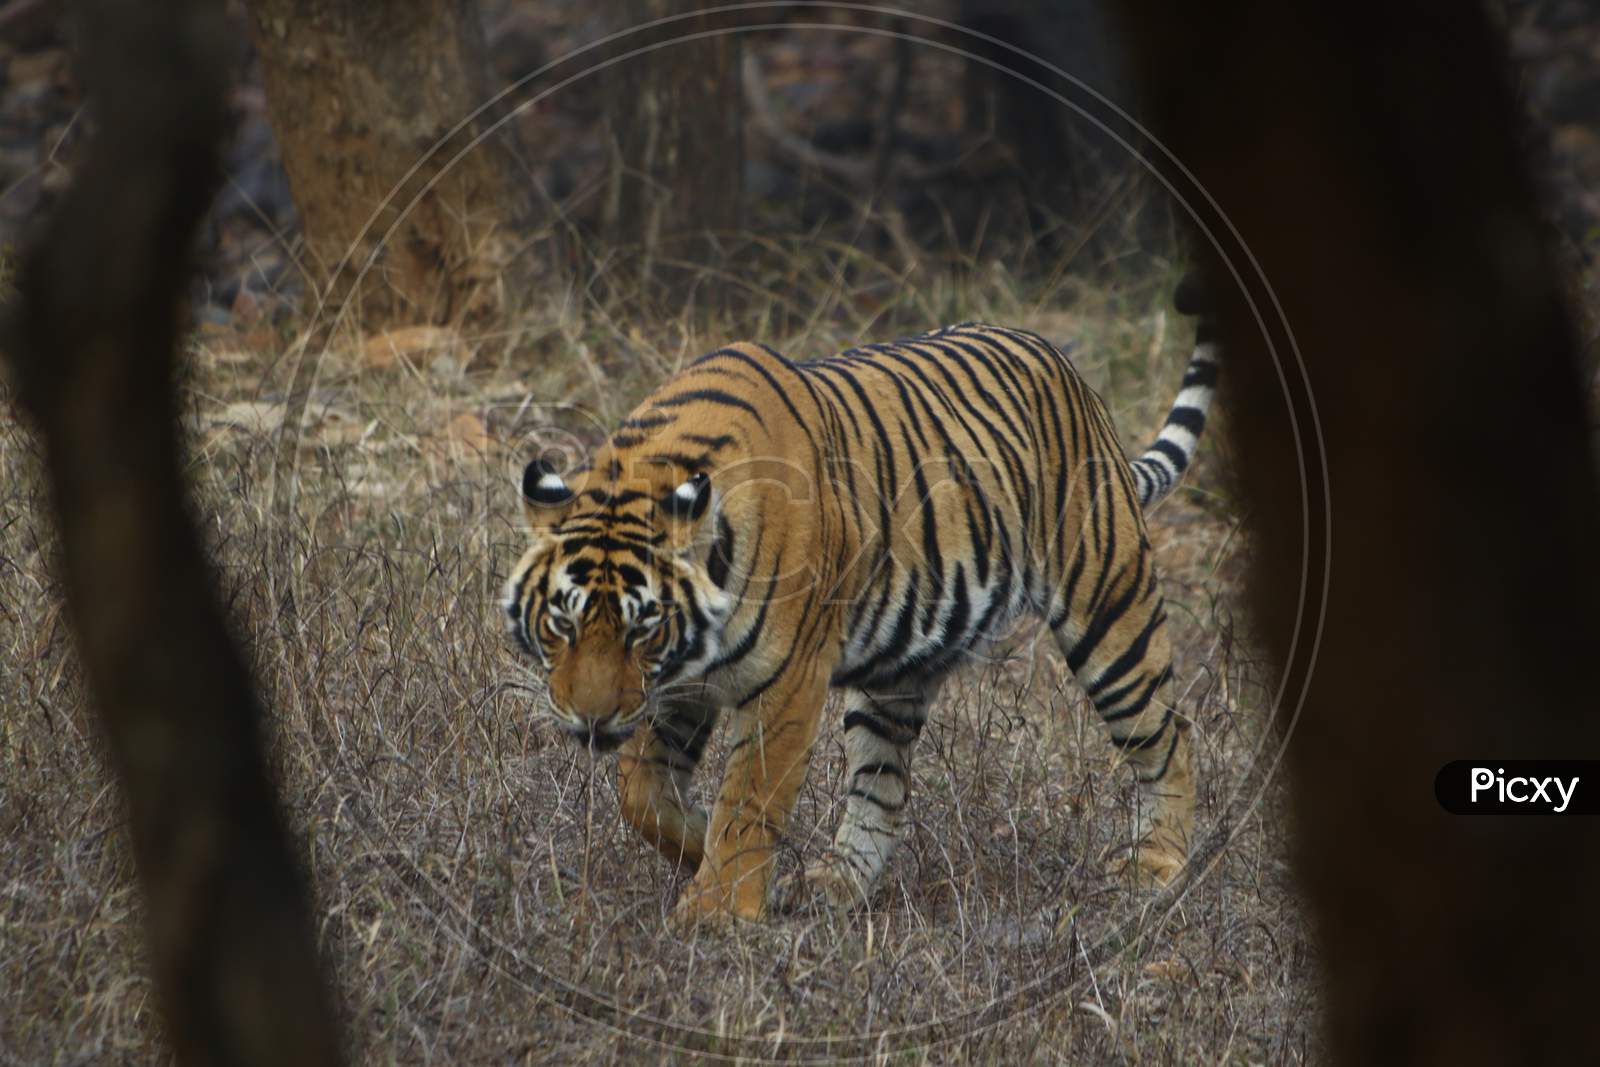 Wild Tigress At The Ranthambore National Park In Rajasthan, India On 9 Feb 2020.